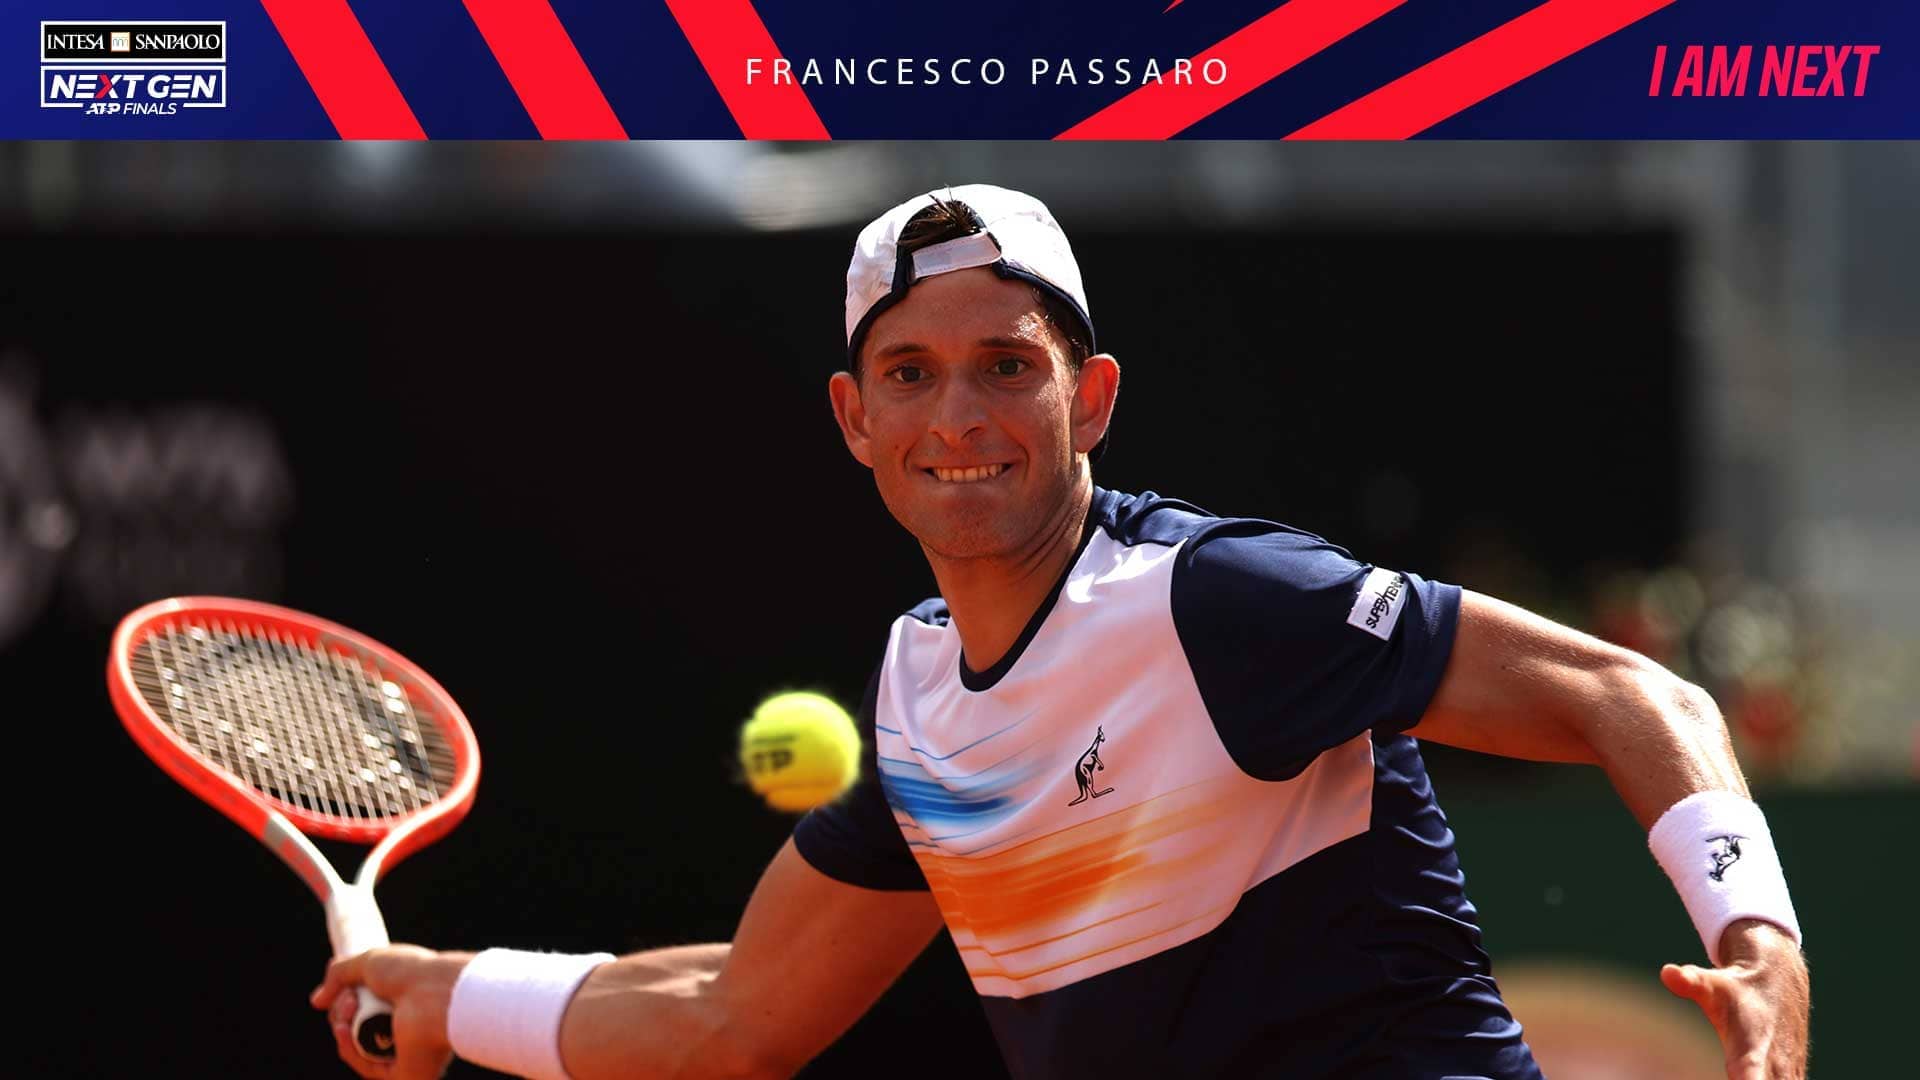 A Brighter Present and Future for Italian Tennis in the ATP